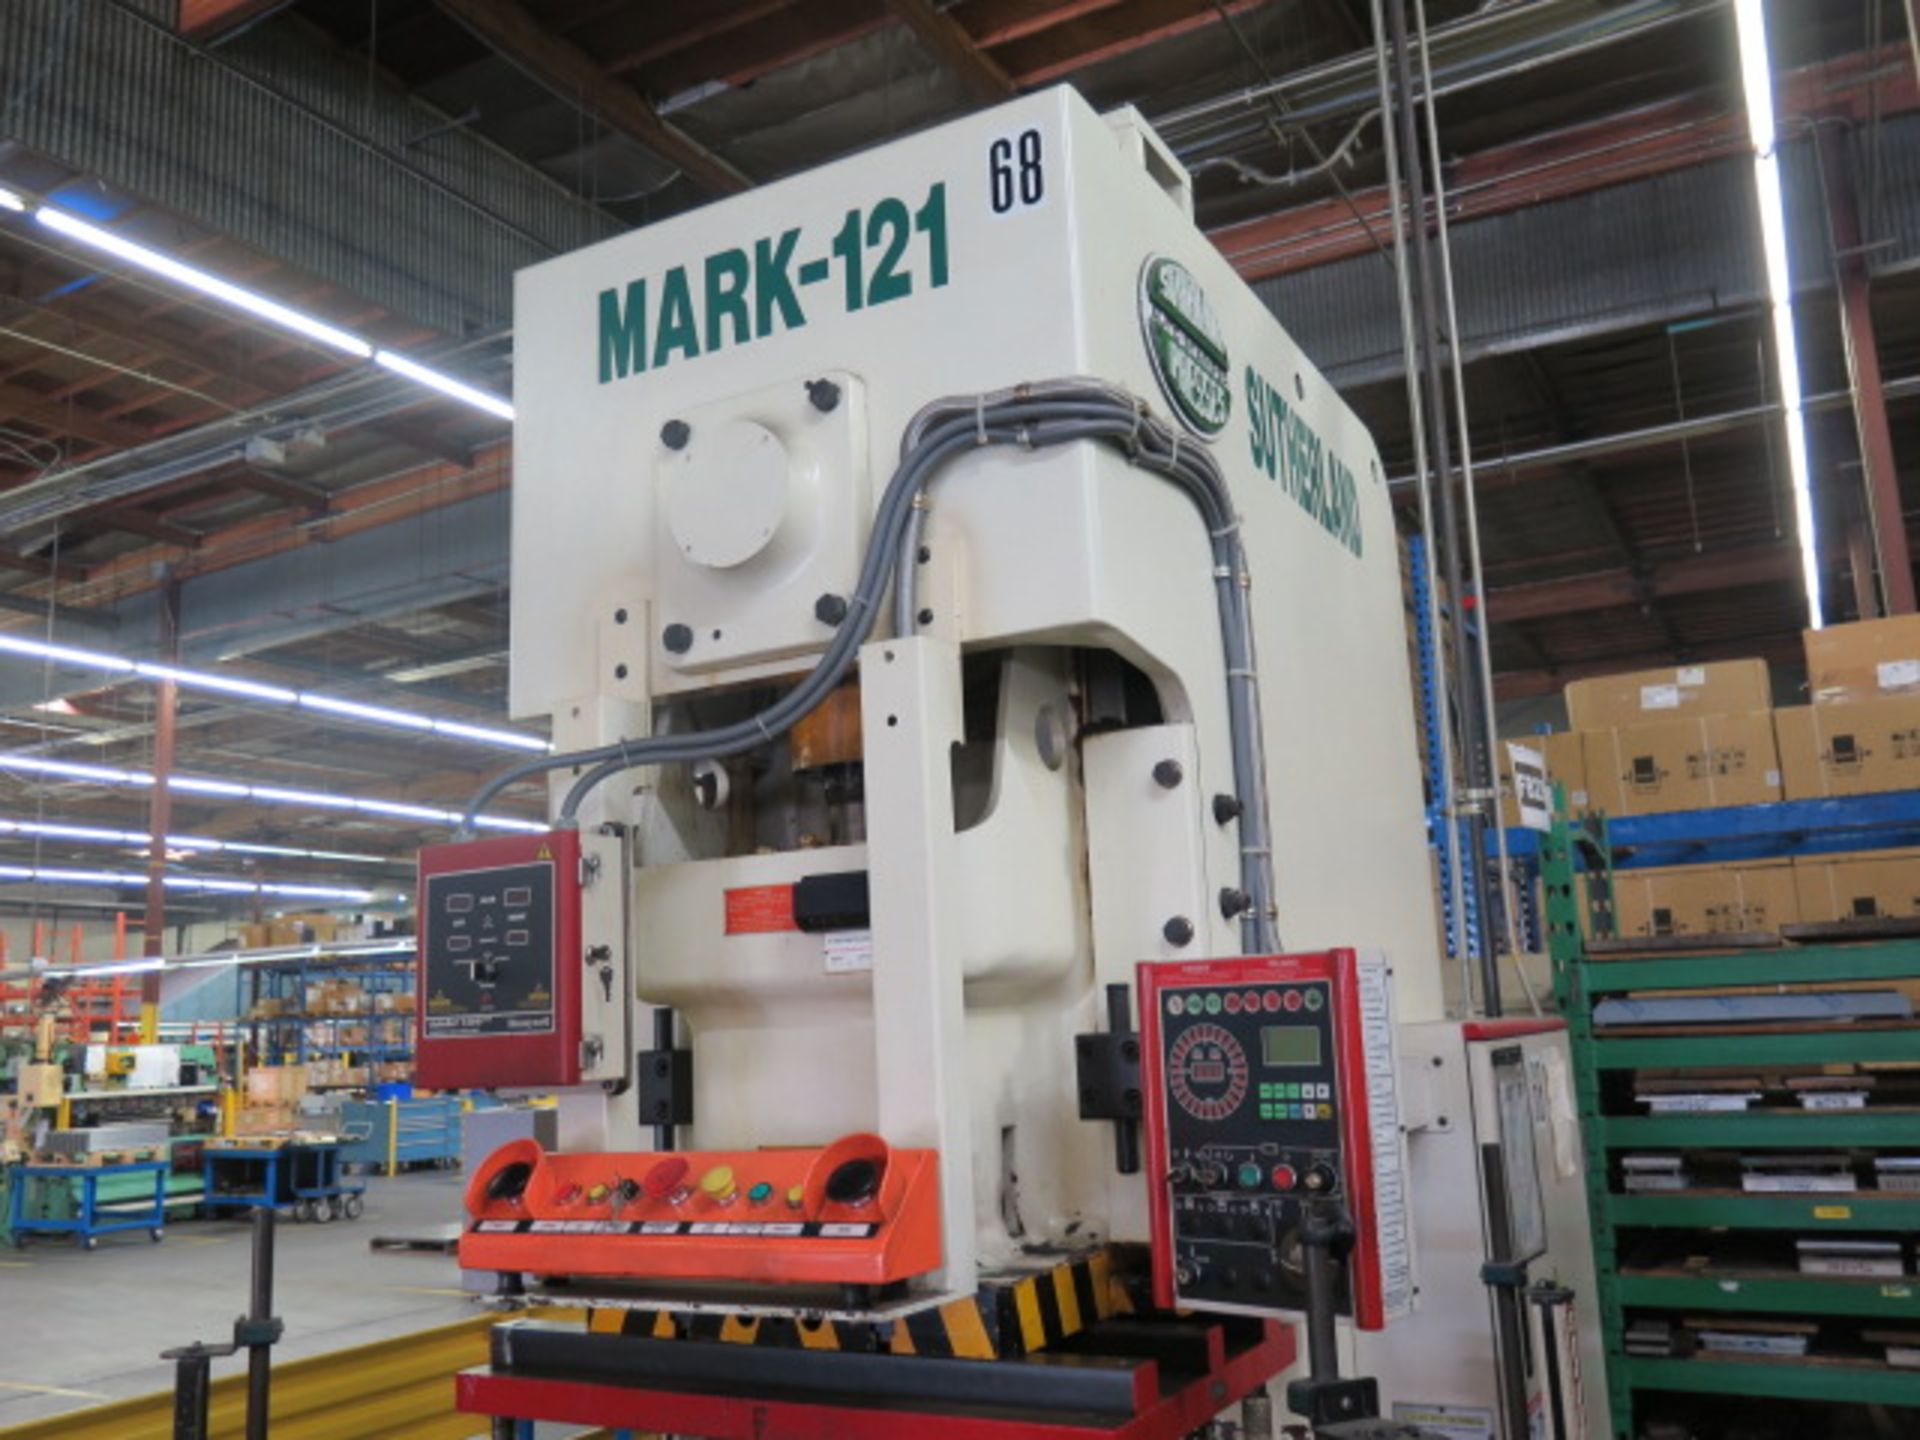 2002 Southerland MARK-121 121 Ton Gap Frame Punch Press s/n 10201101009 Wintress Control, SOLD AS IS - Image 6 of 18